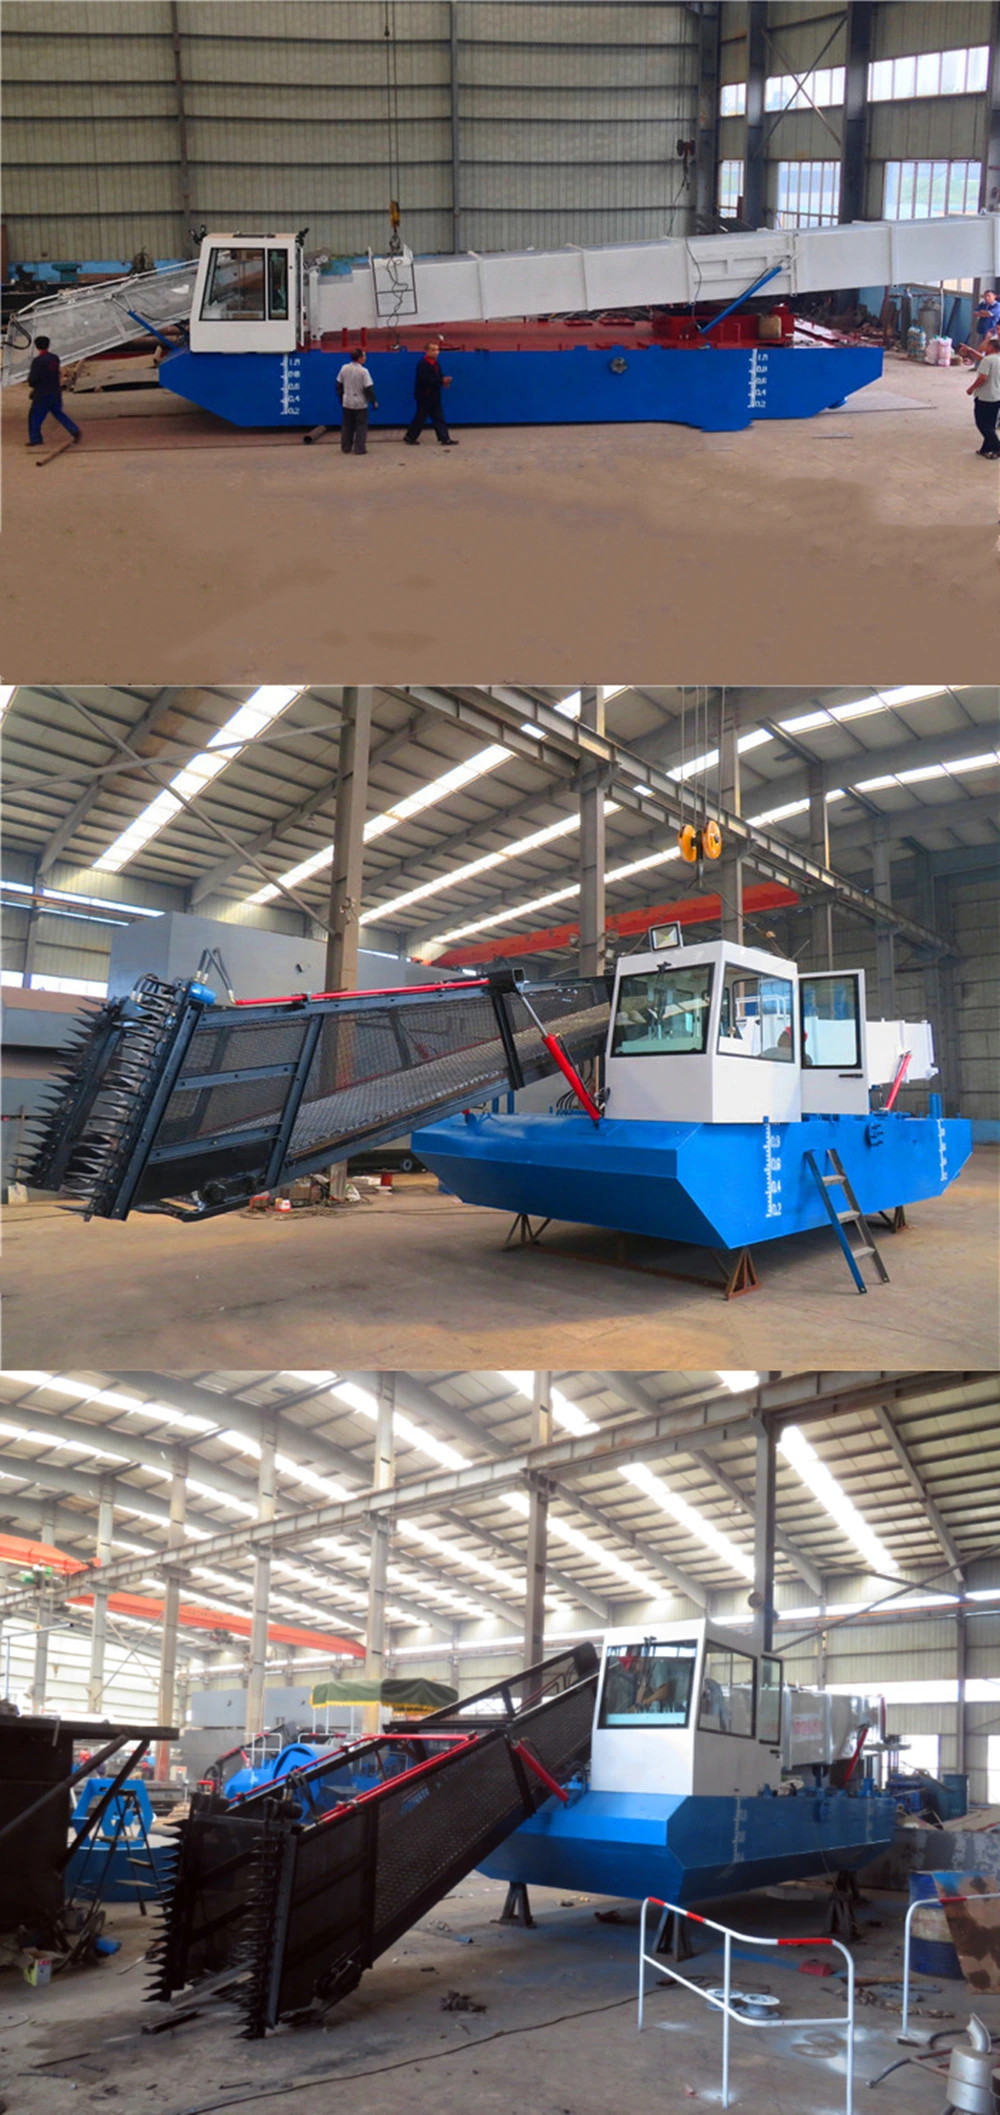 Large River Rubbish Cleaning Aquatic Boat, Aquatic Weed Harvester Manufacturer